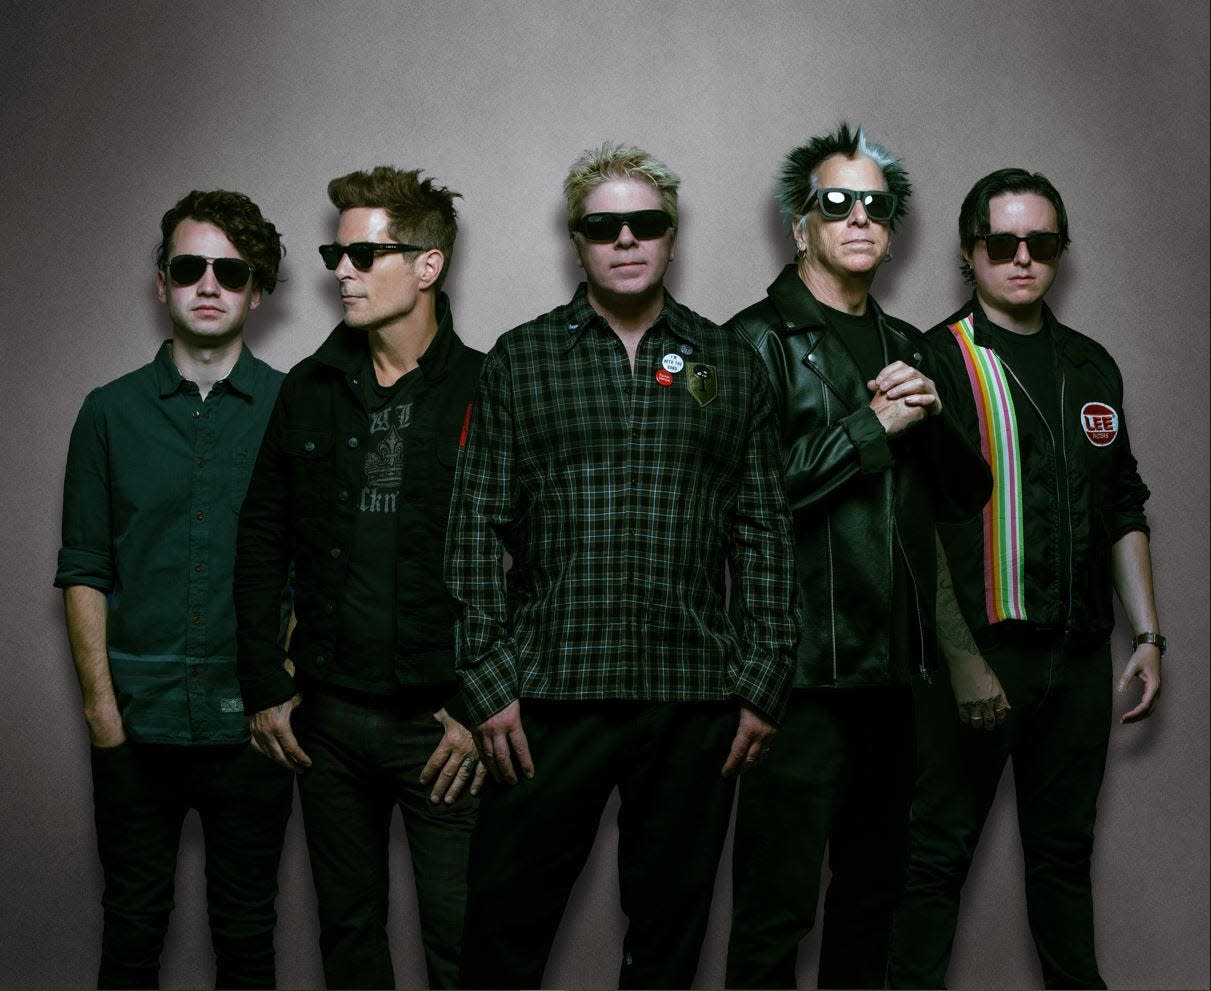 The Offspring will play Riverbend Music Center on Wednesday, Aug. 30.